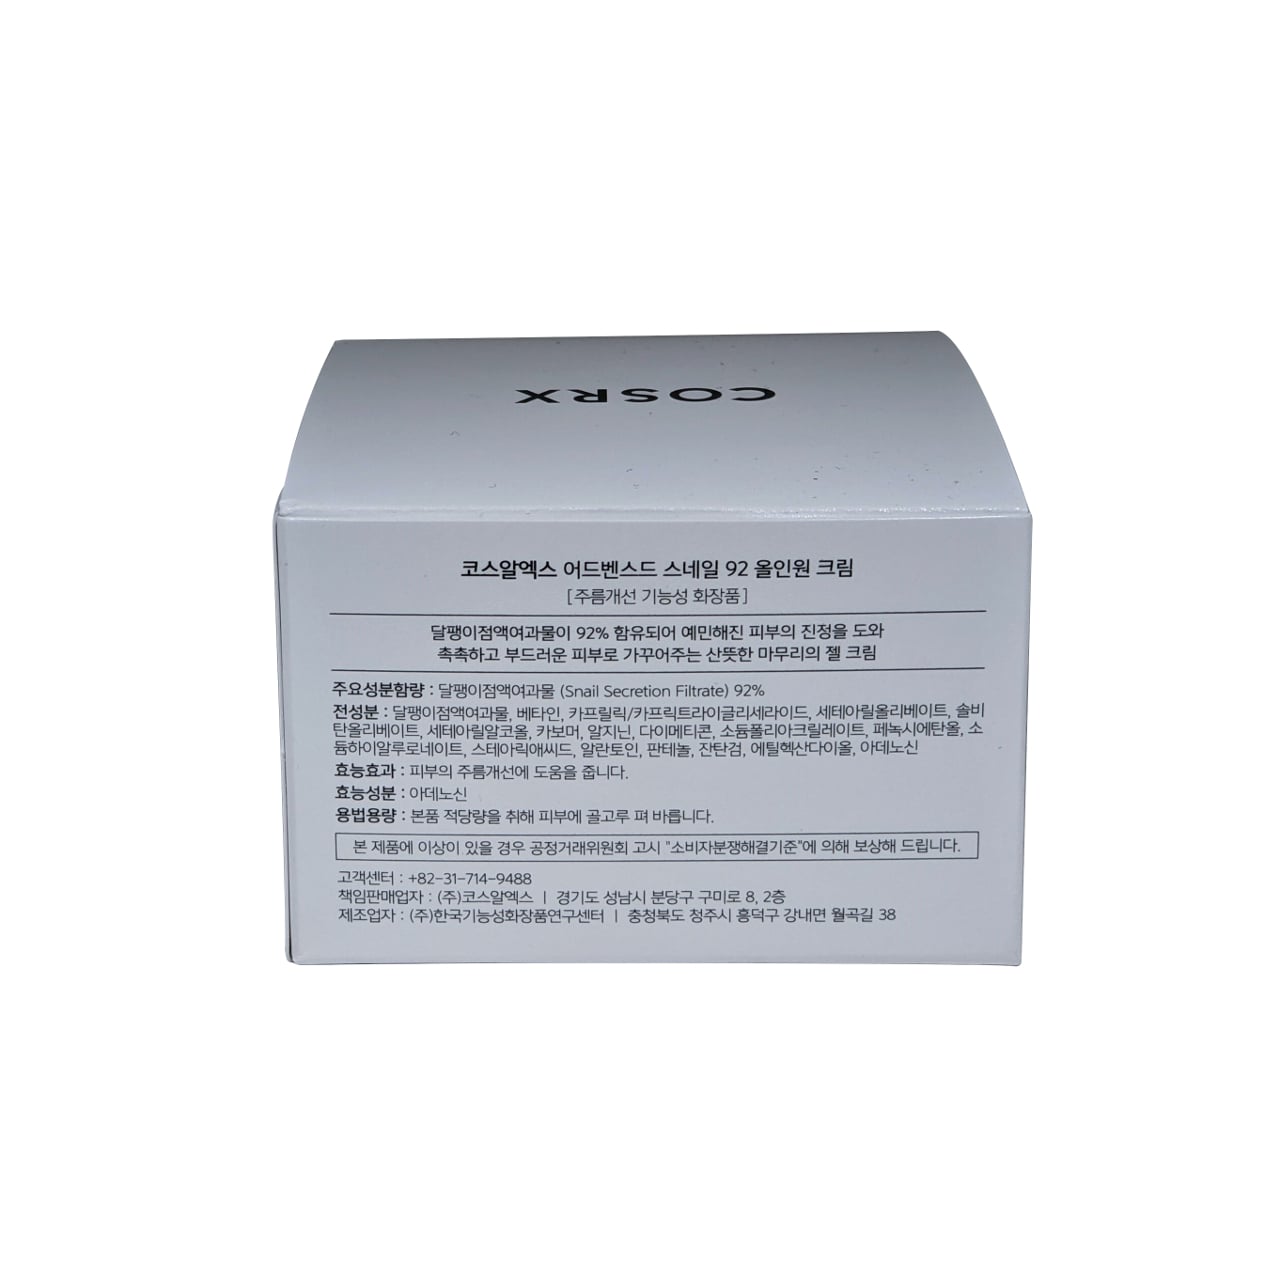 Product details for COSRX Advanced Snail 92 All in One Cream in Korean 2